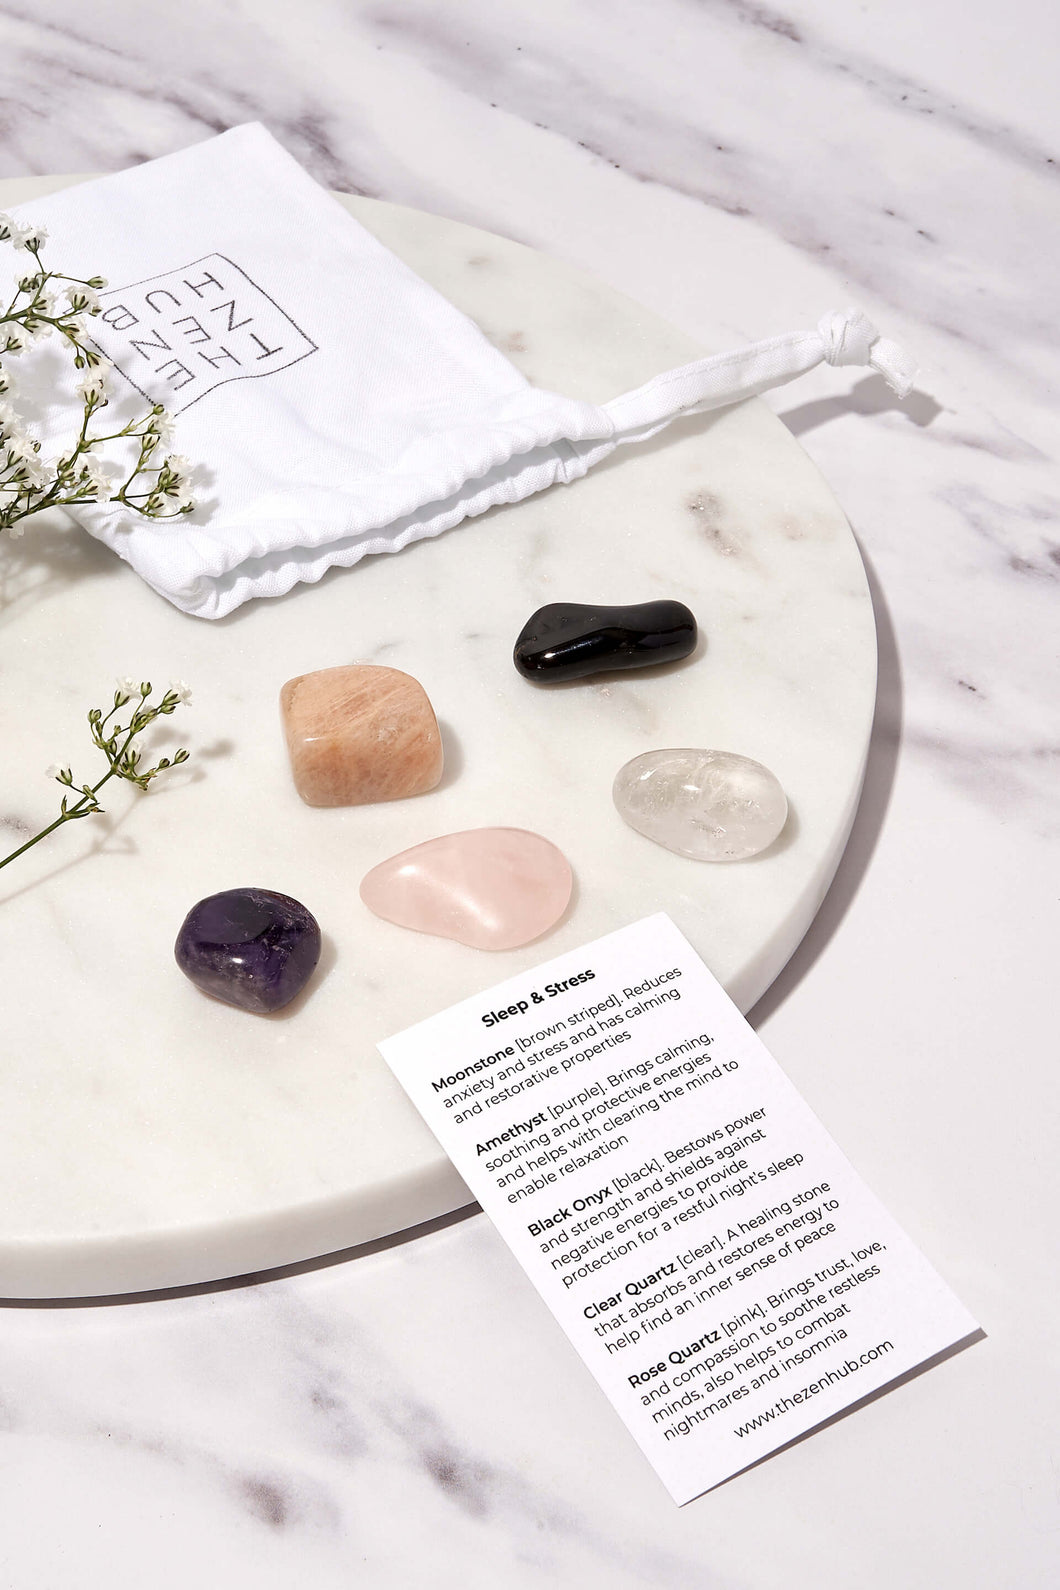 crystals designed to help with sleep and stress presented on a white marble background. There is also a white drawstring bag and explanation card beside them 